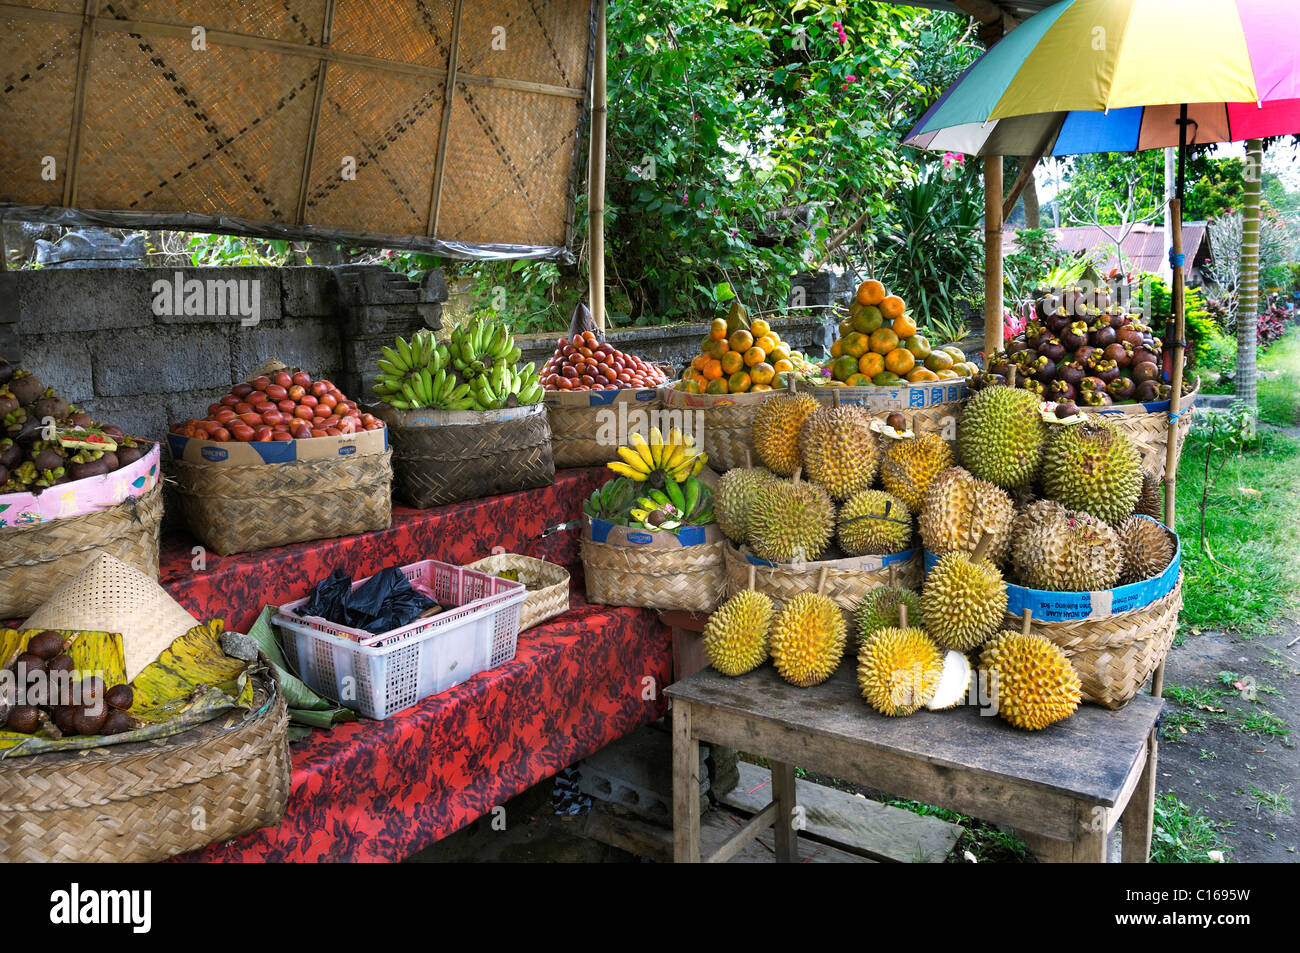 Spikey fruit of the Durian Tree (Durio zibethinus) and other fruits, near Bangli, Bali, Indonesia, South East Asia Stock Photo